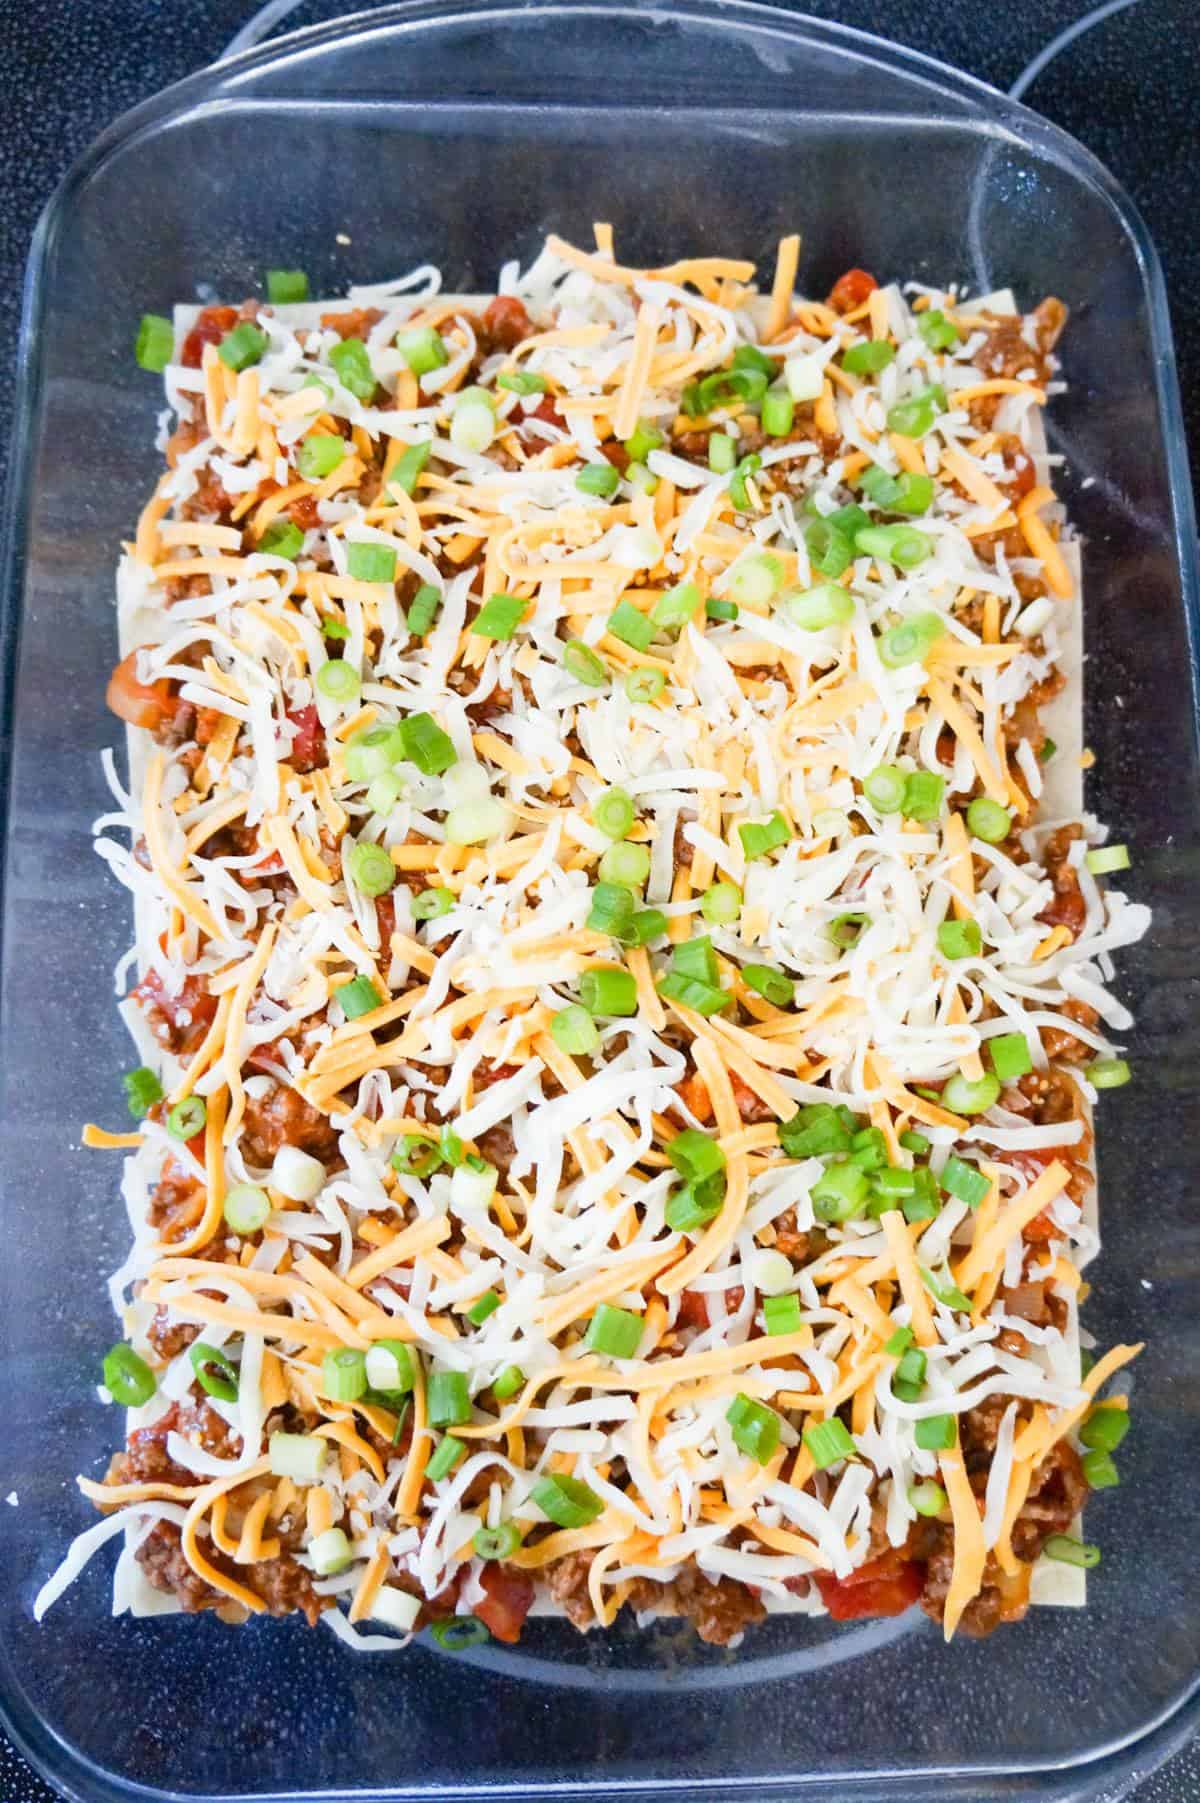 chopped green onions and shredded cheese on top of meat mixture in a baking dish